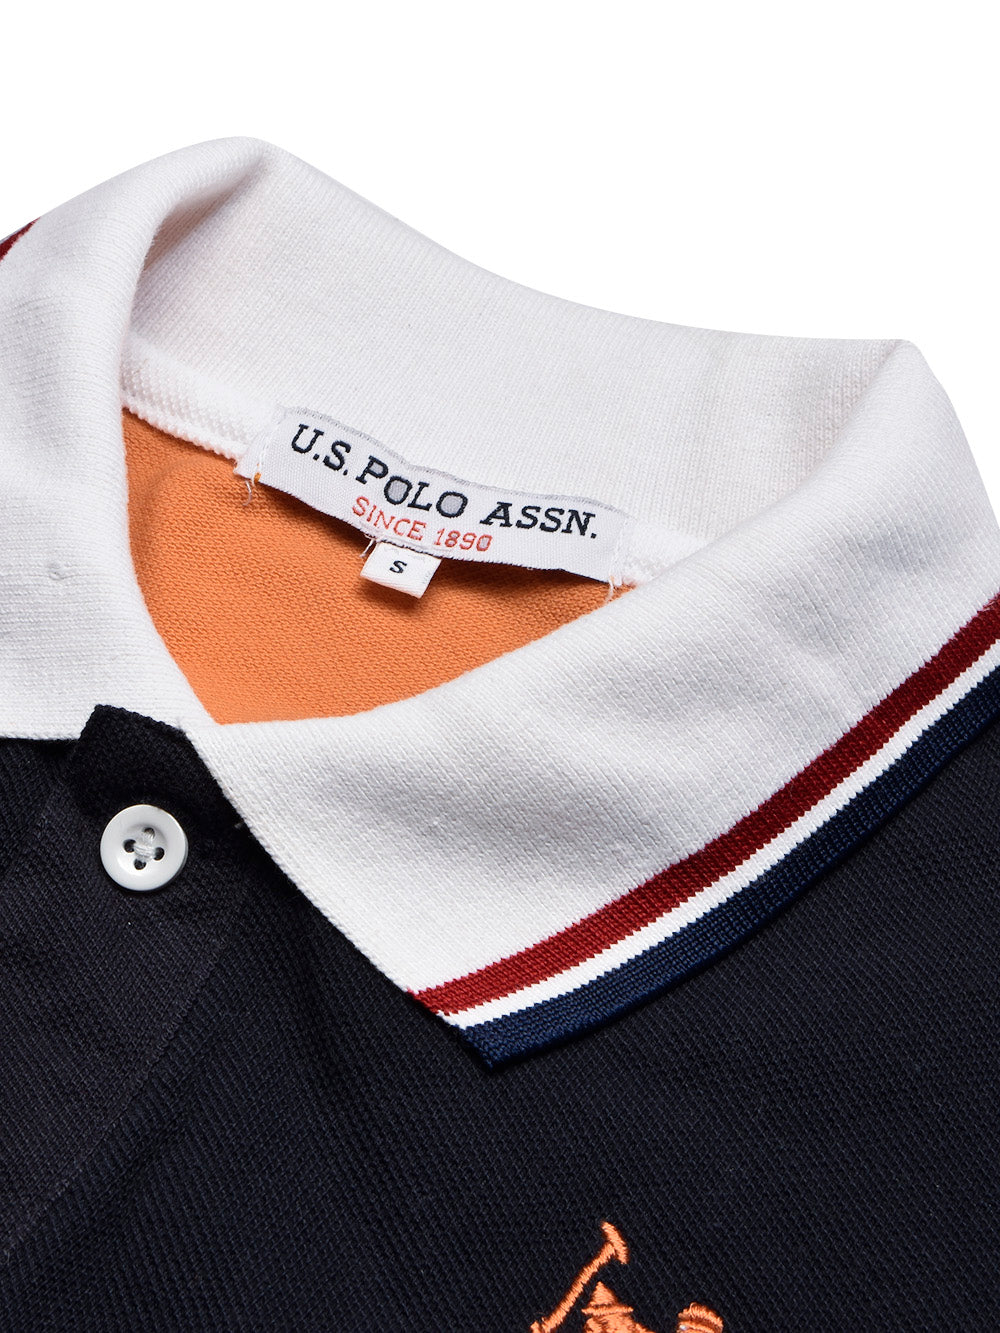 U.S Polo Assn. Summer Polo Shirt For Men-Orange with Navy & White Panel-BE809/BR13050